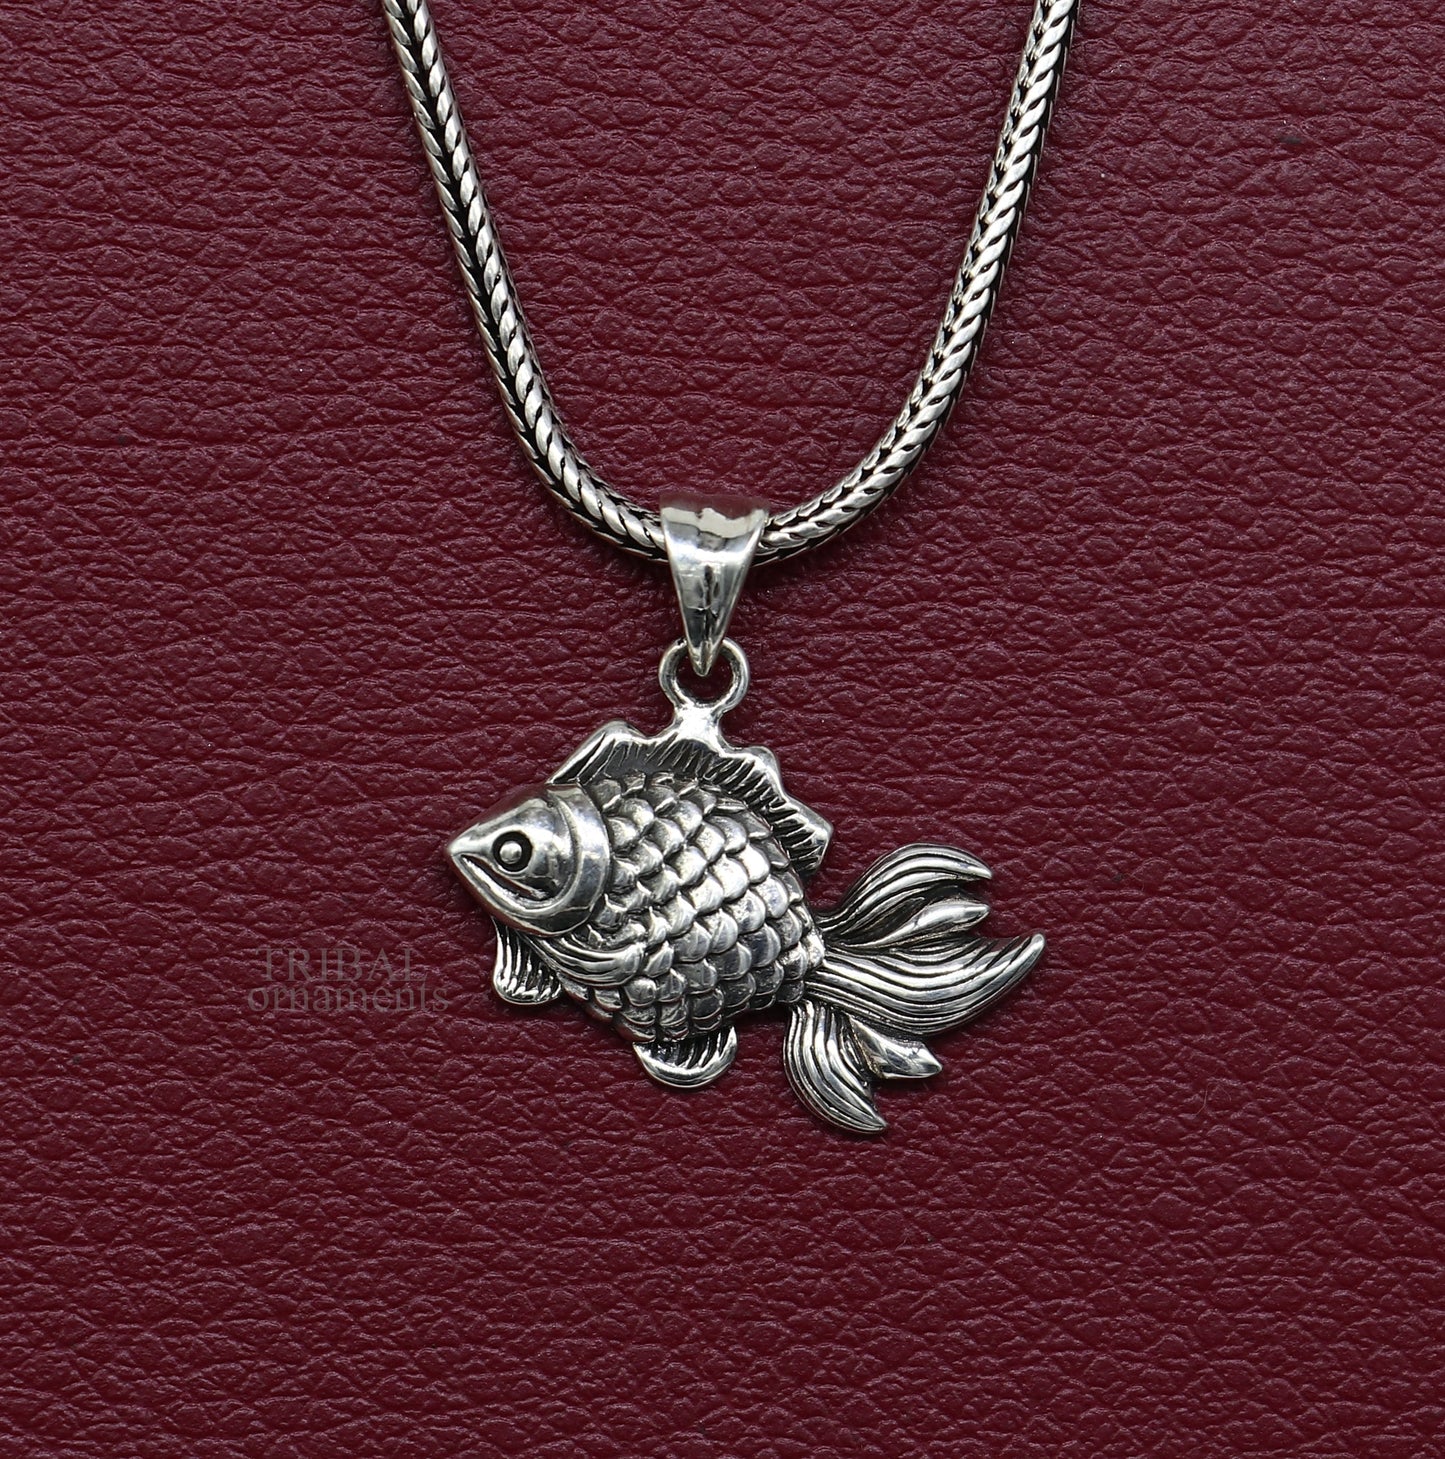 Hunting and Fishing Handmade 925 Sterling Silver Pendant Necklace